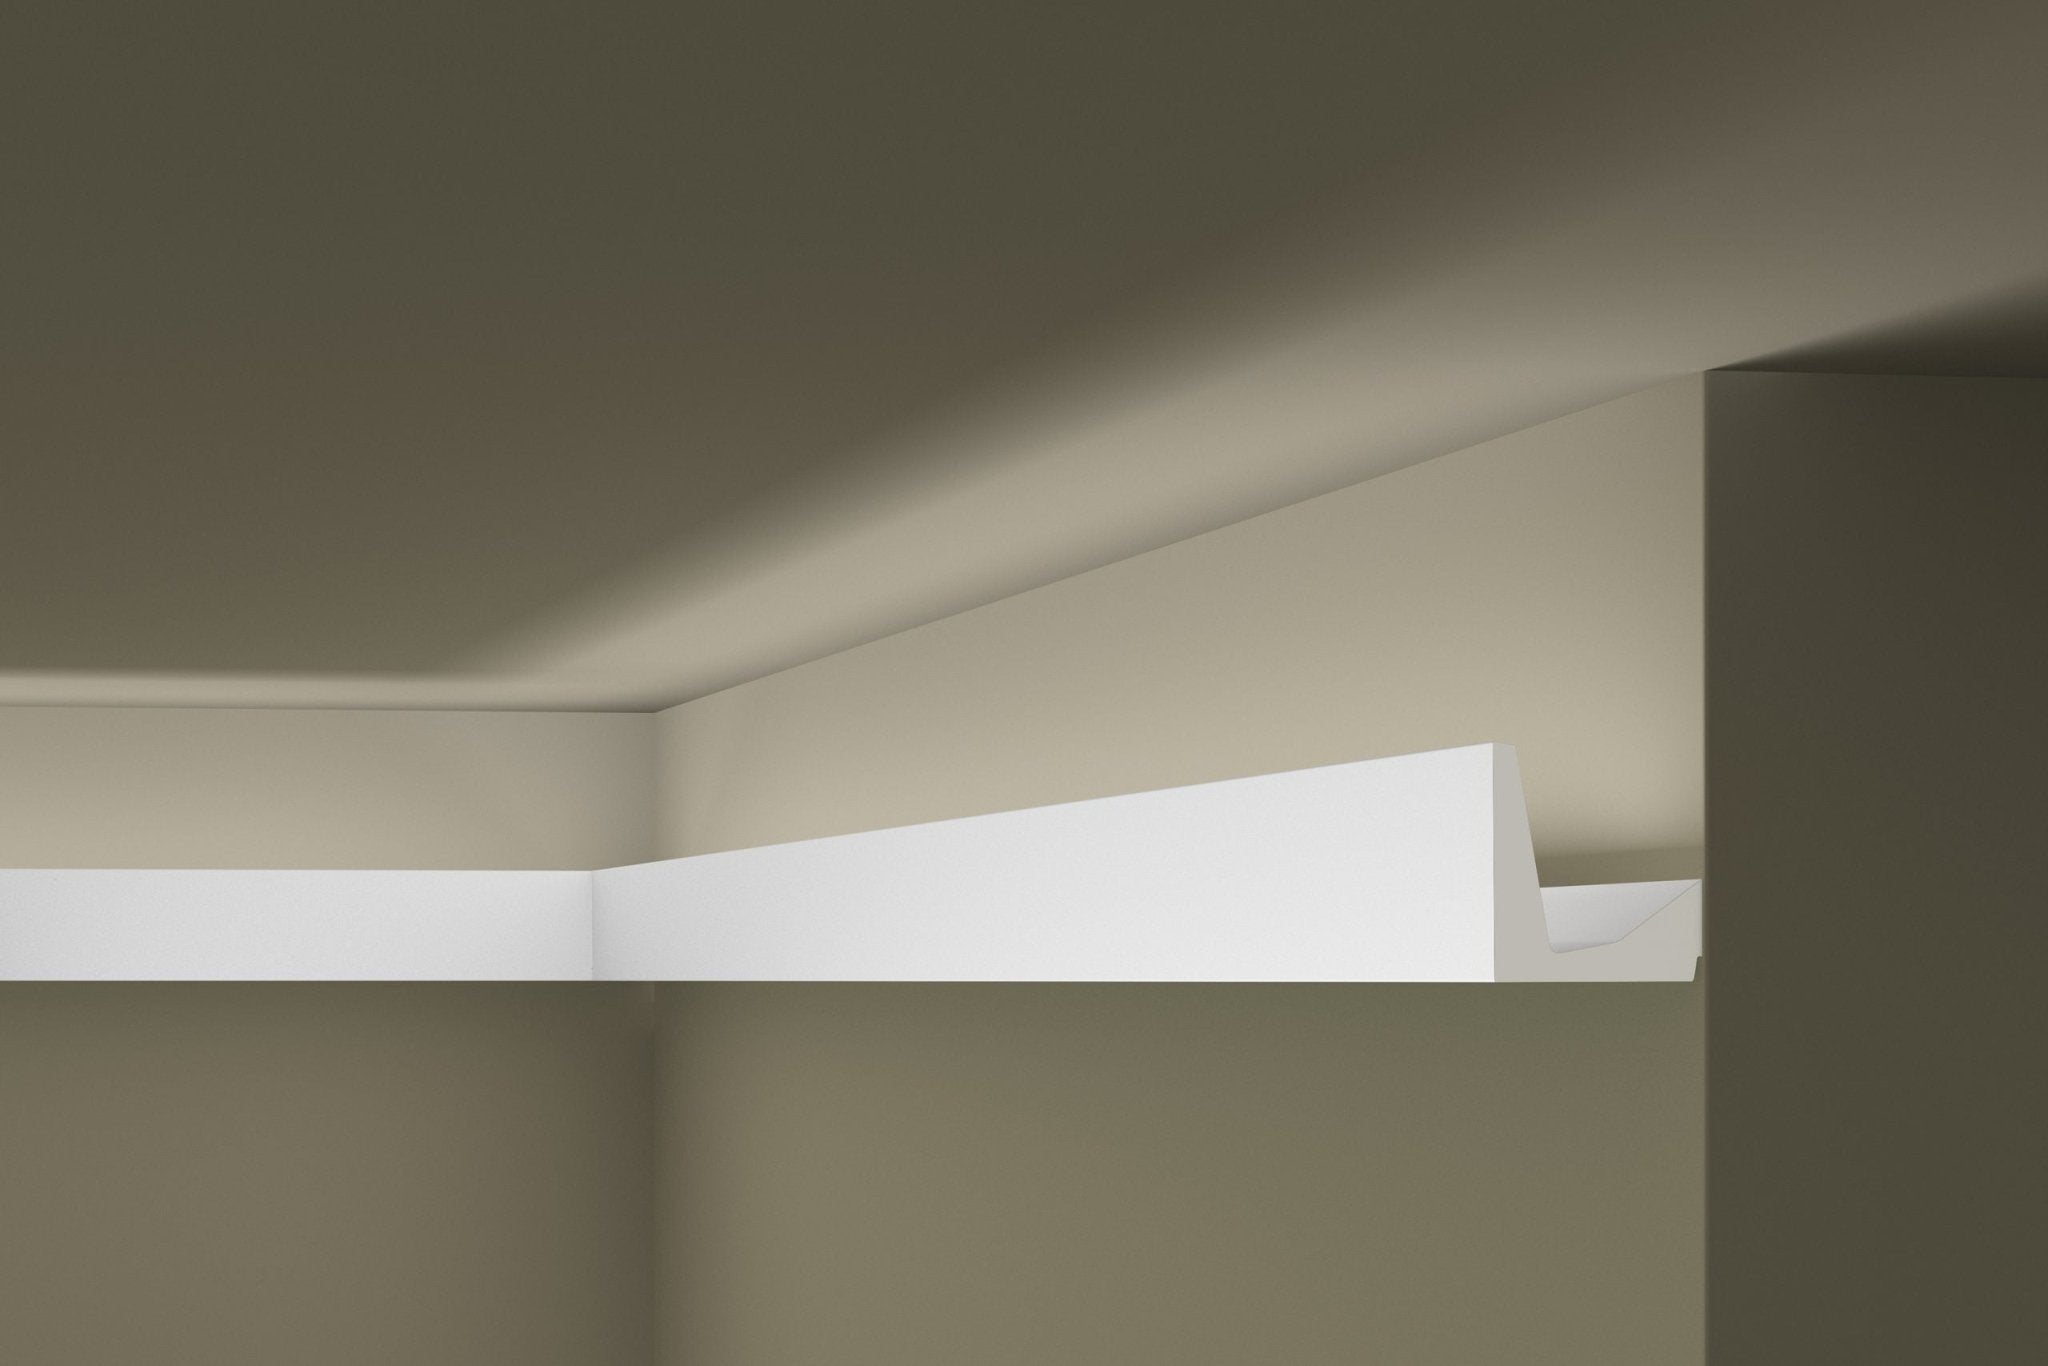 IL5 ARSTYL 2M COVING LIGHTING SOLUTION - Covings | DecorMania